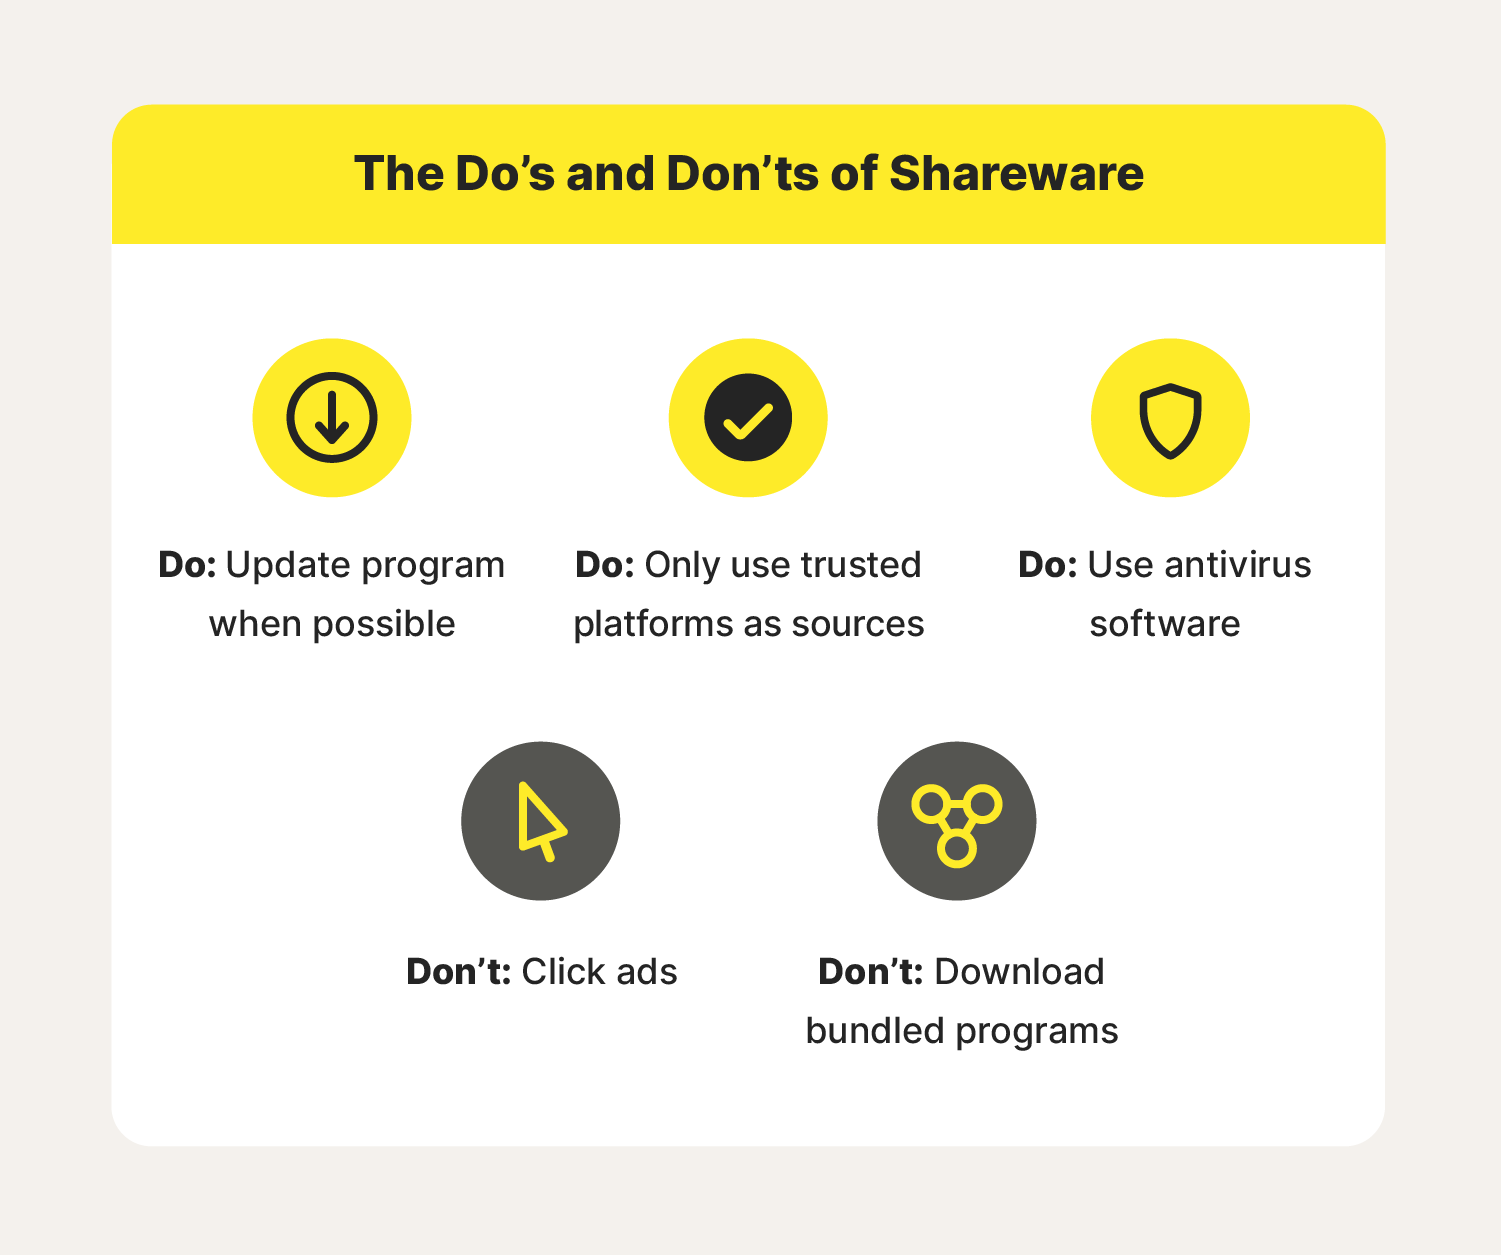 dos and donts of shareware